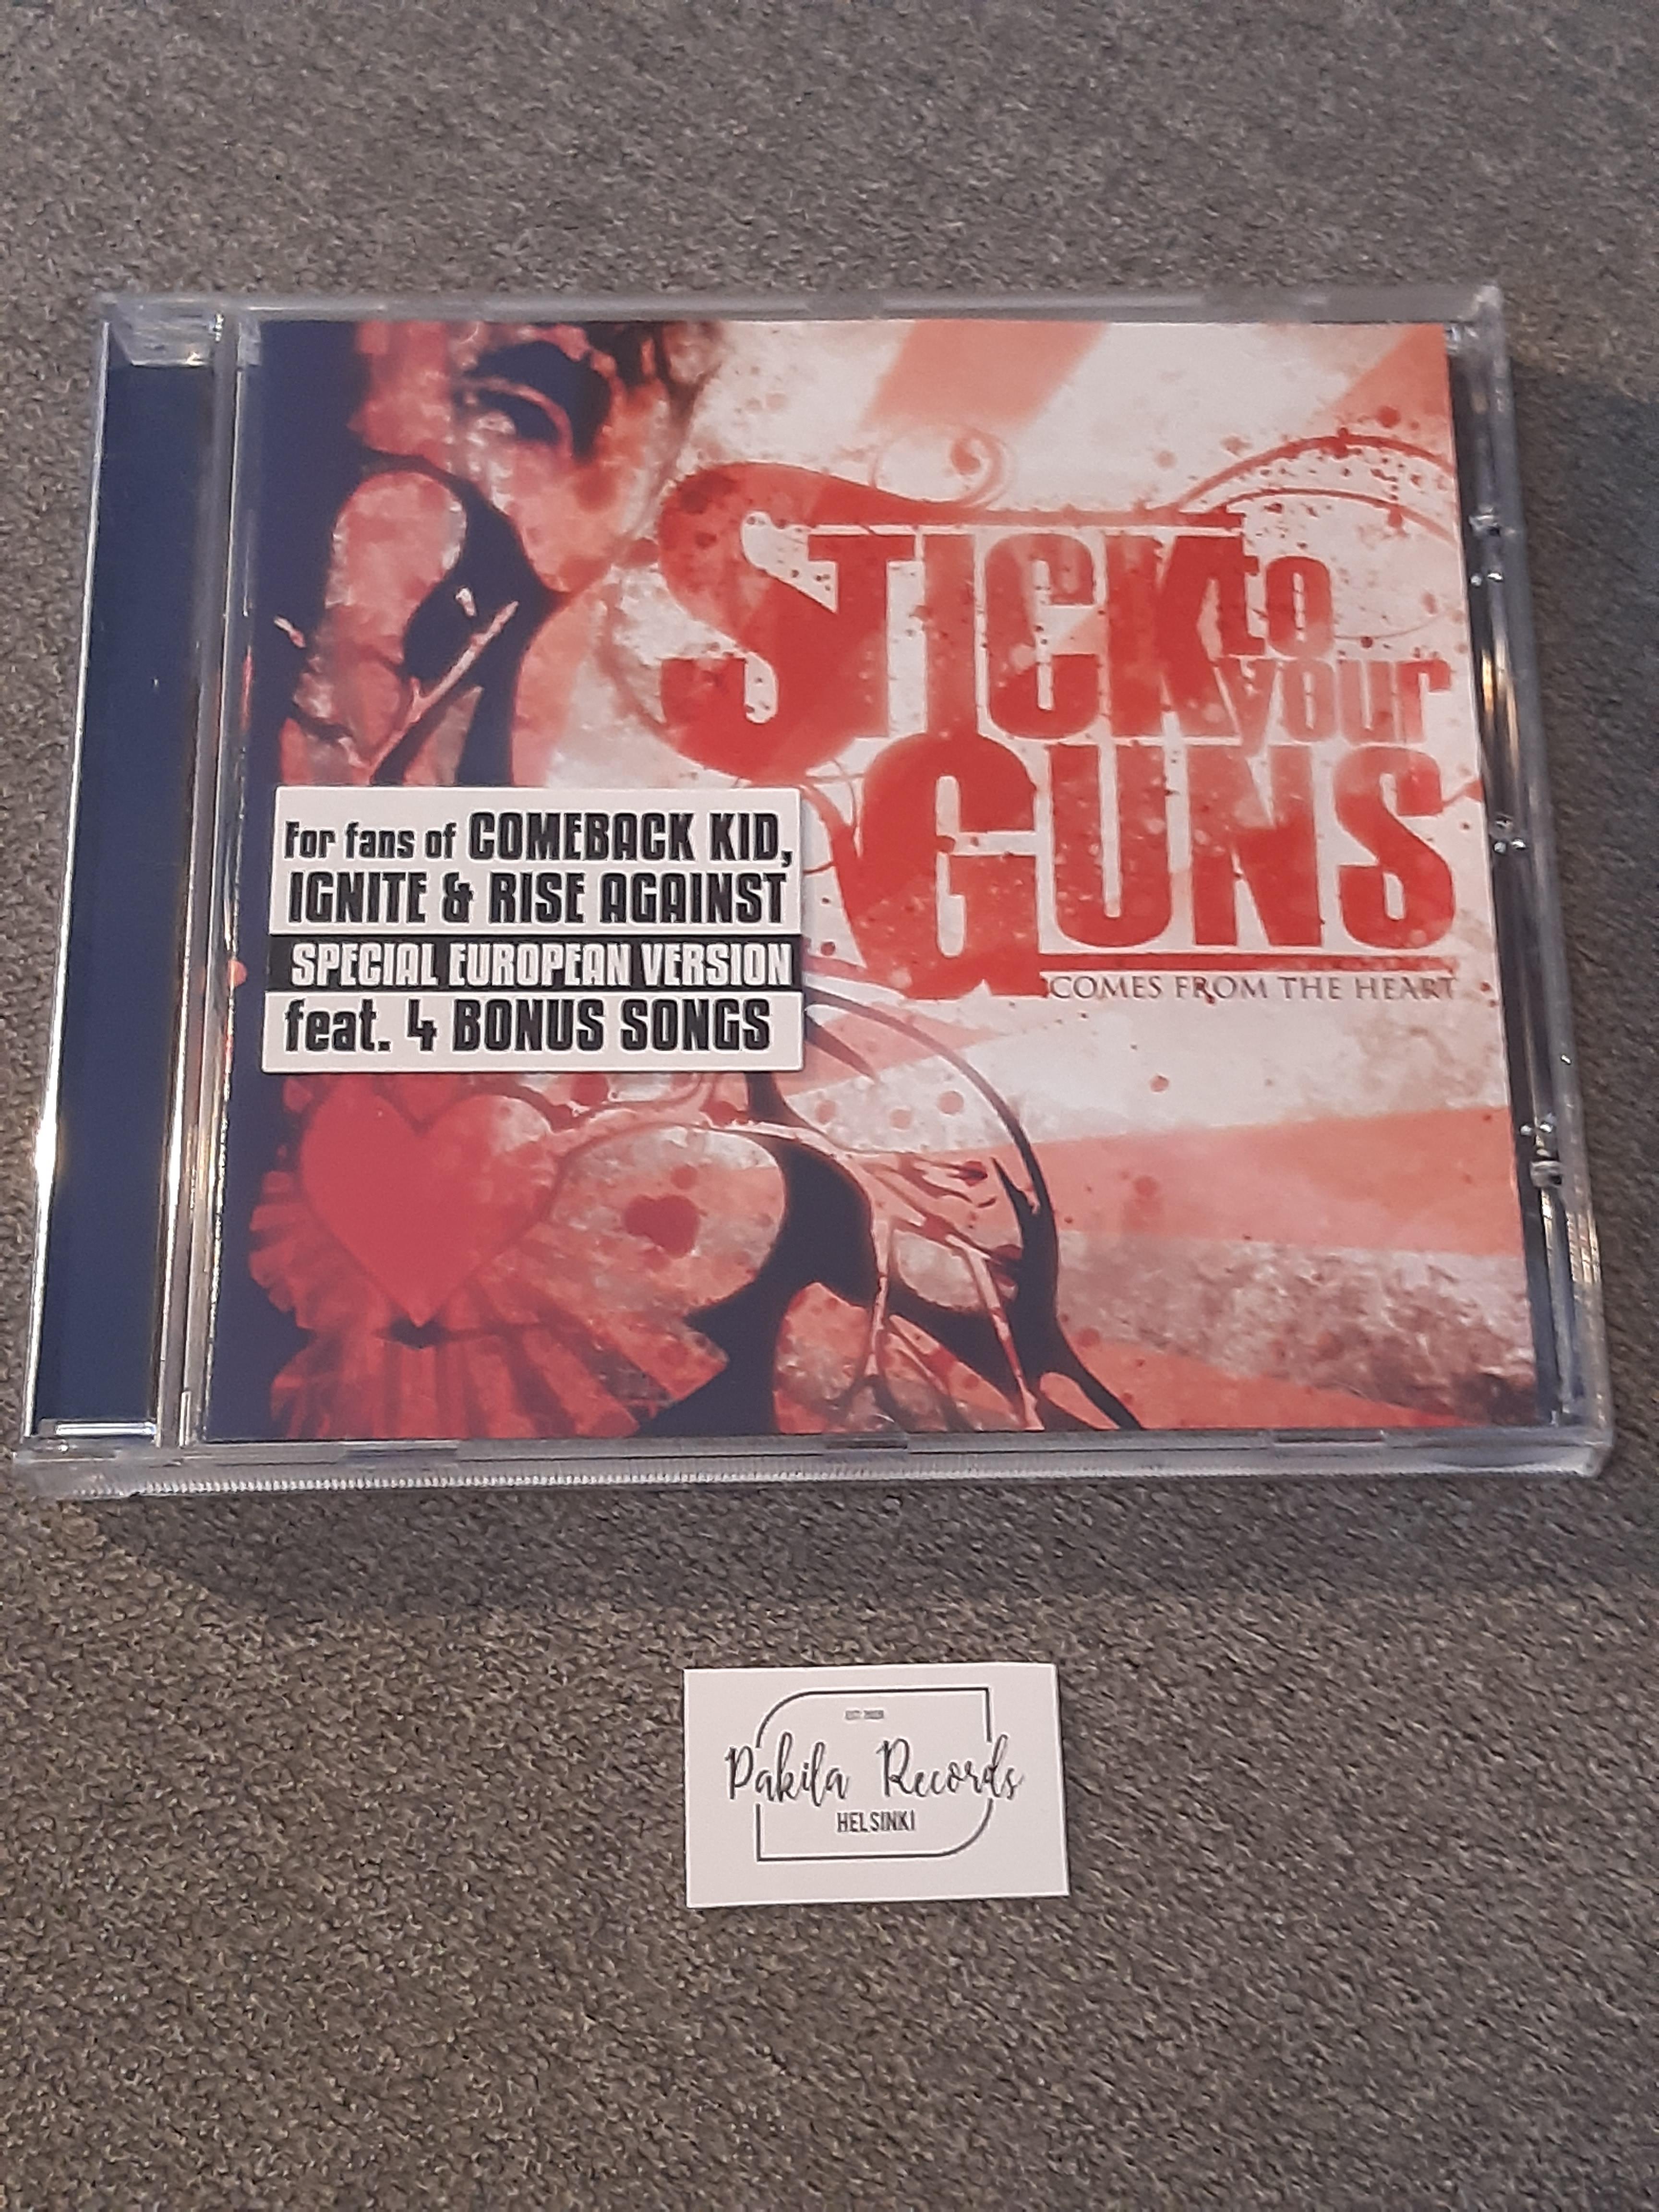 Stick To Your Guns - Comes From The Heart - CD (käytetty)